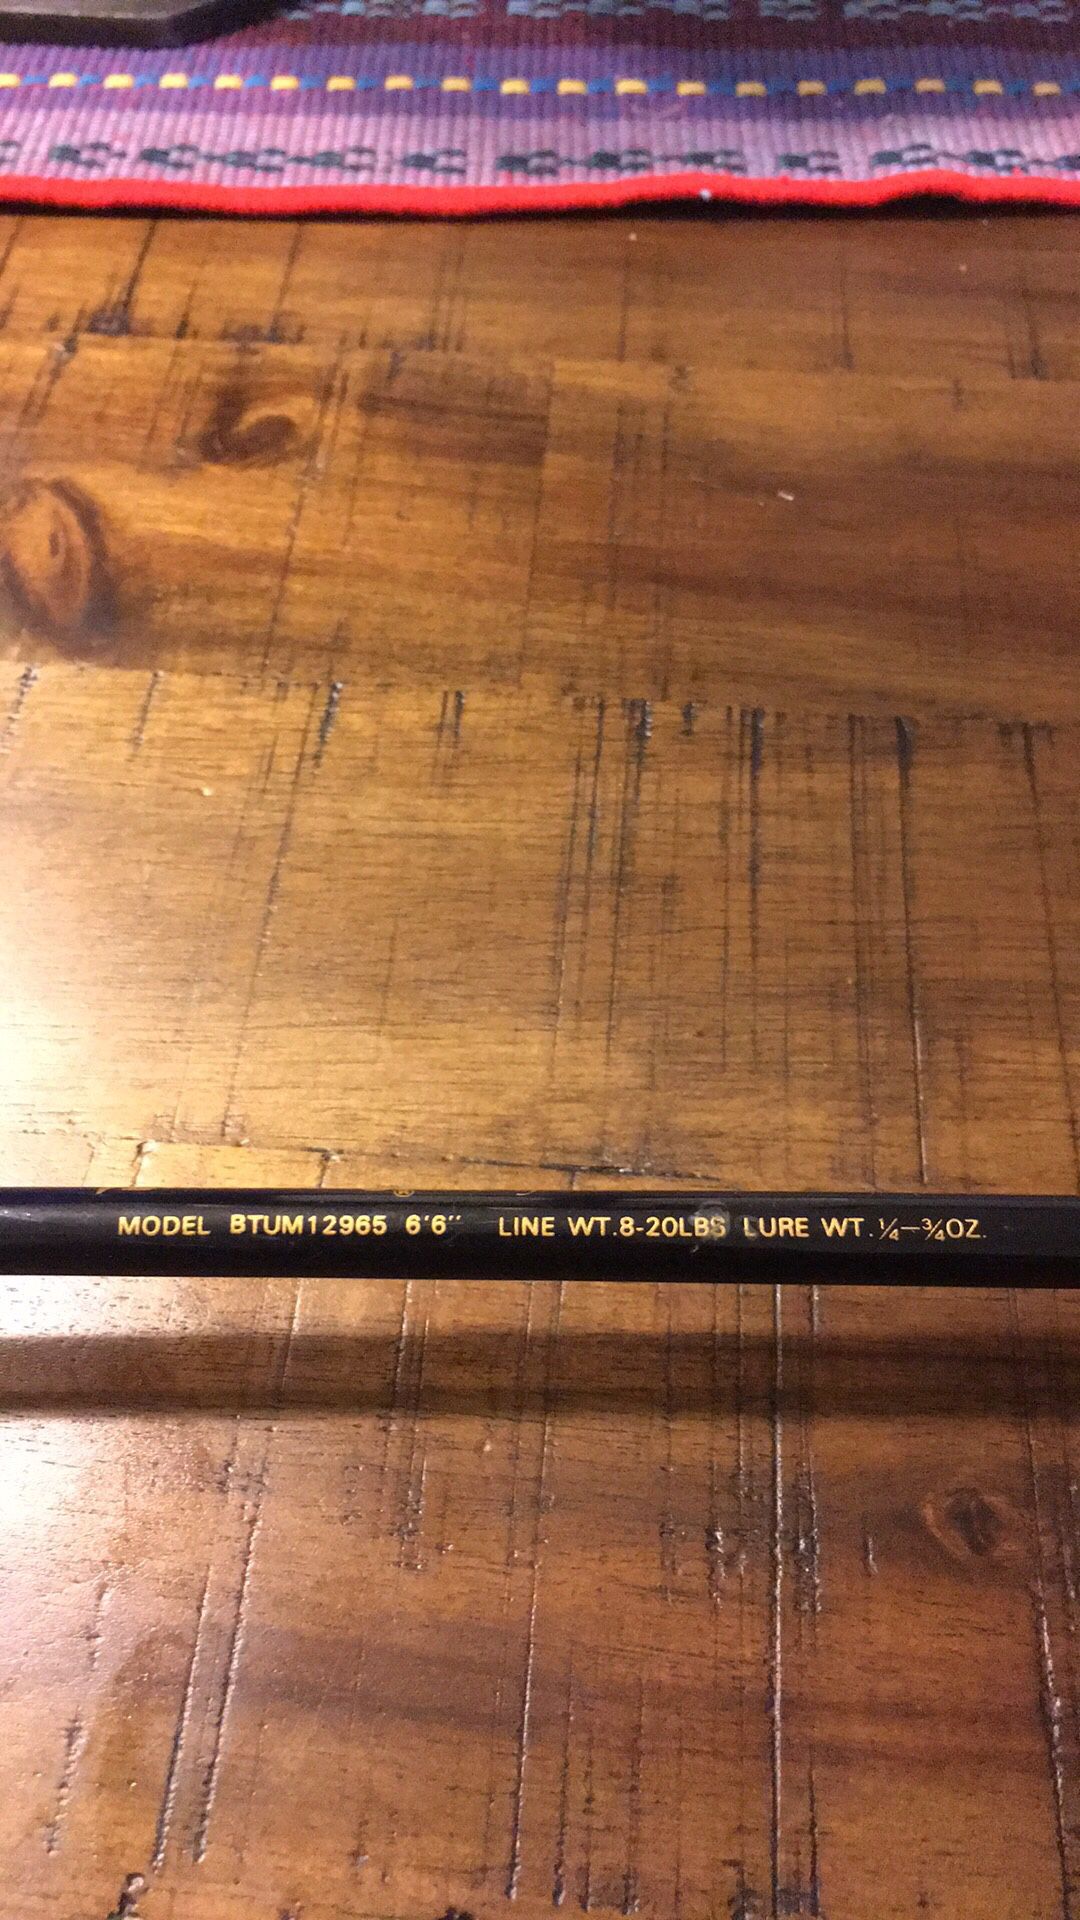 Browning fishing rod for Sale in Buckley, WA - OfferUp